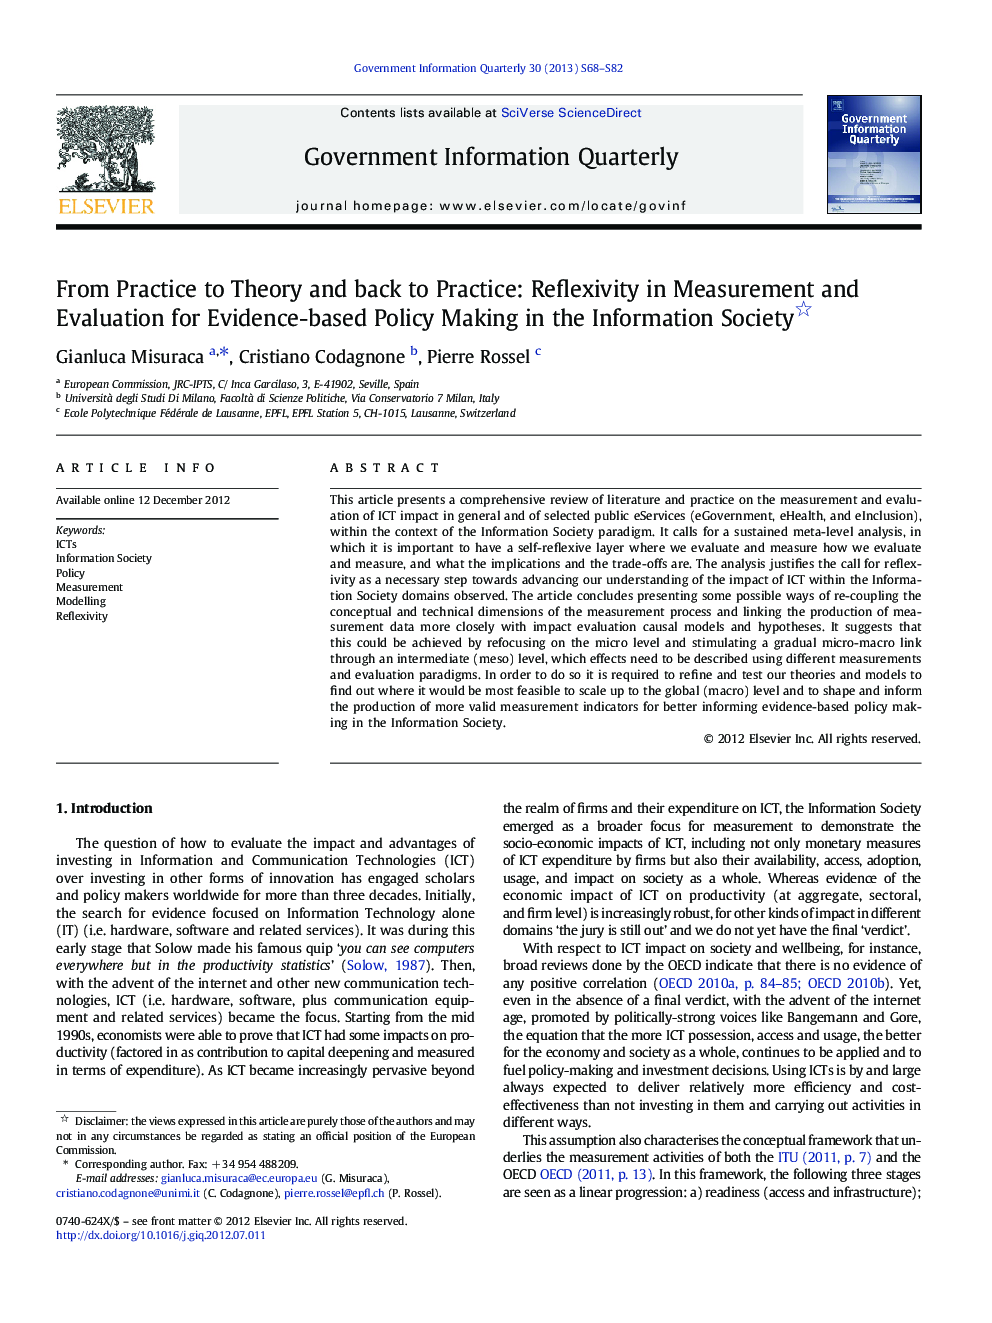 From Practice to Theory and back to Practice: Reflexivity in Measurement and Evaluation for Evidence-based Policy Making in the Information Society 